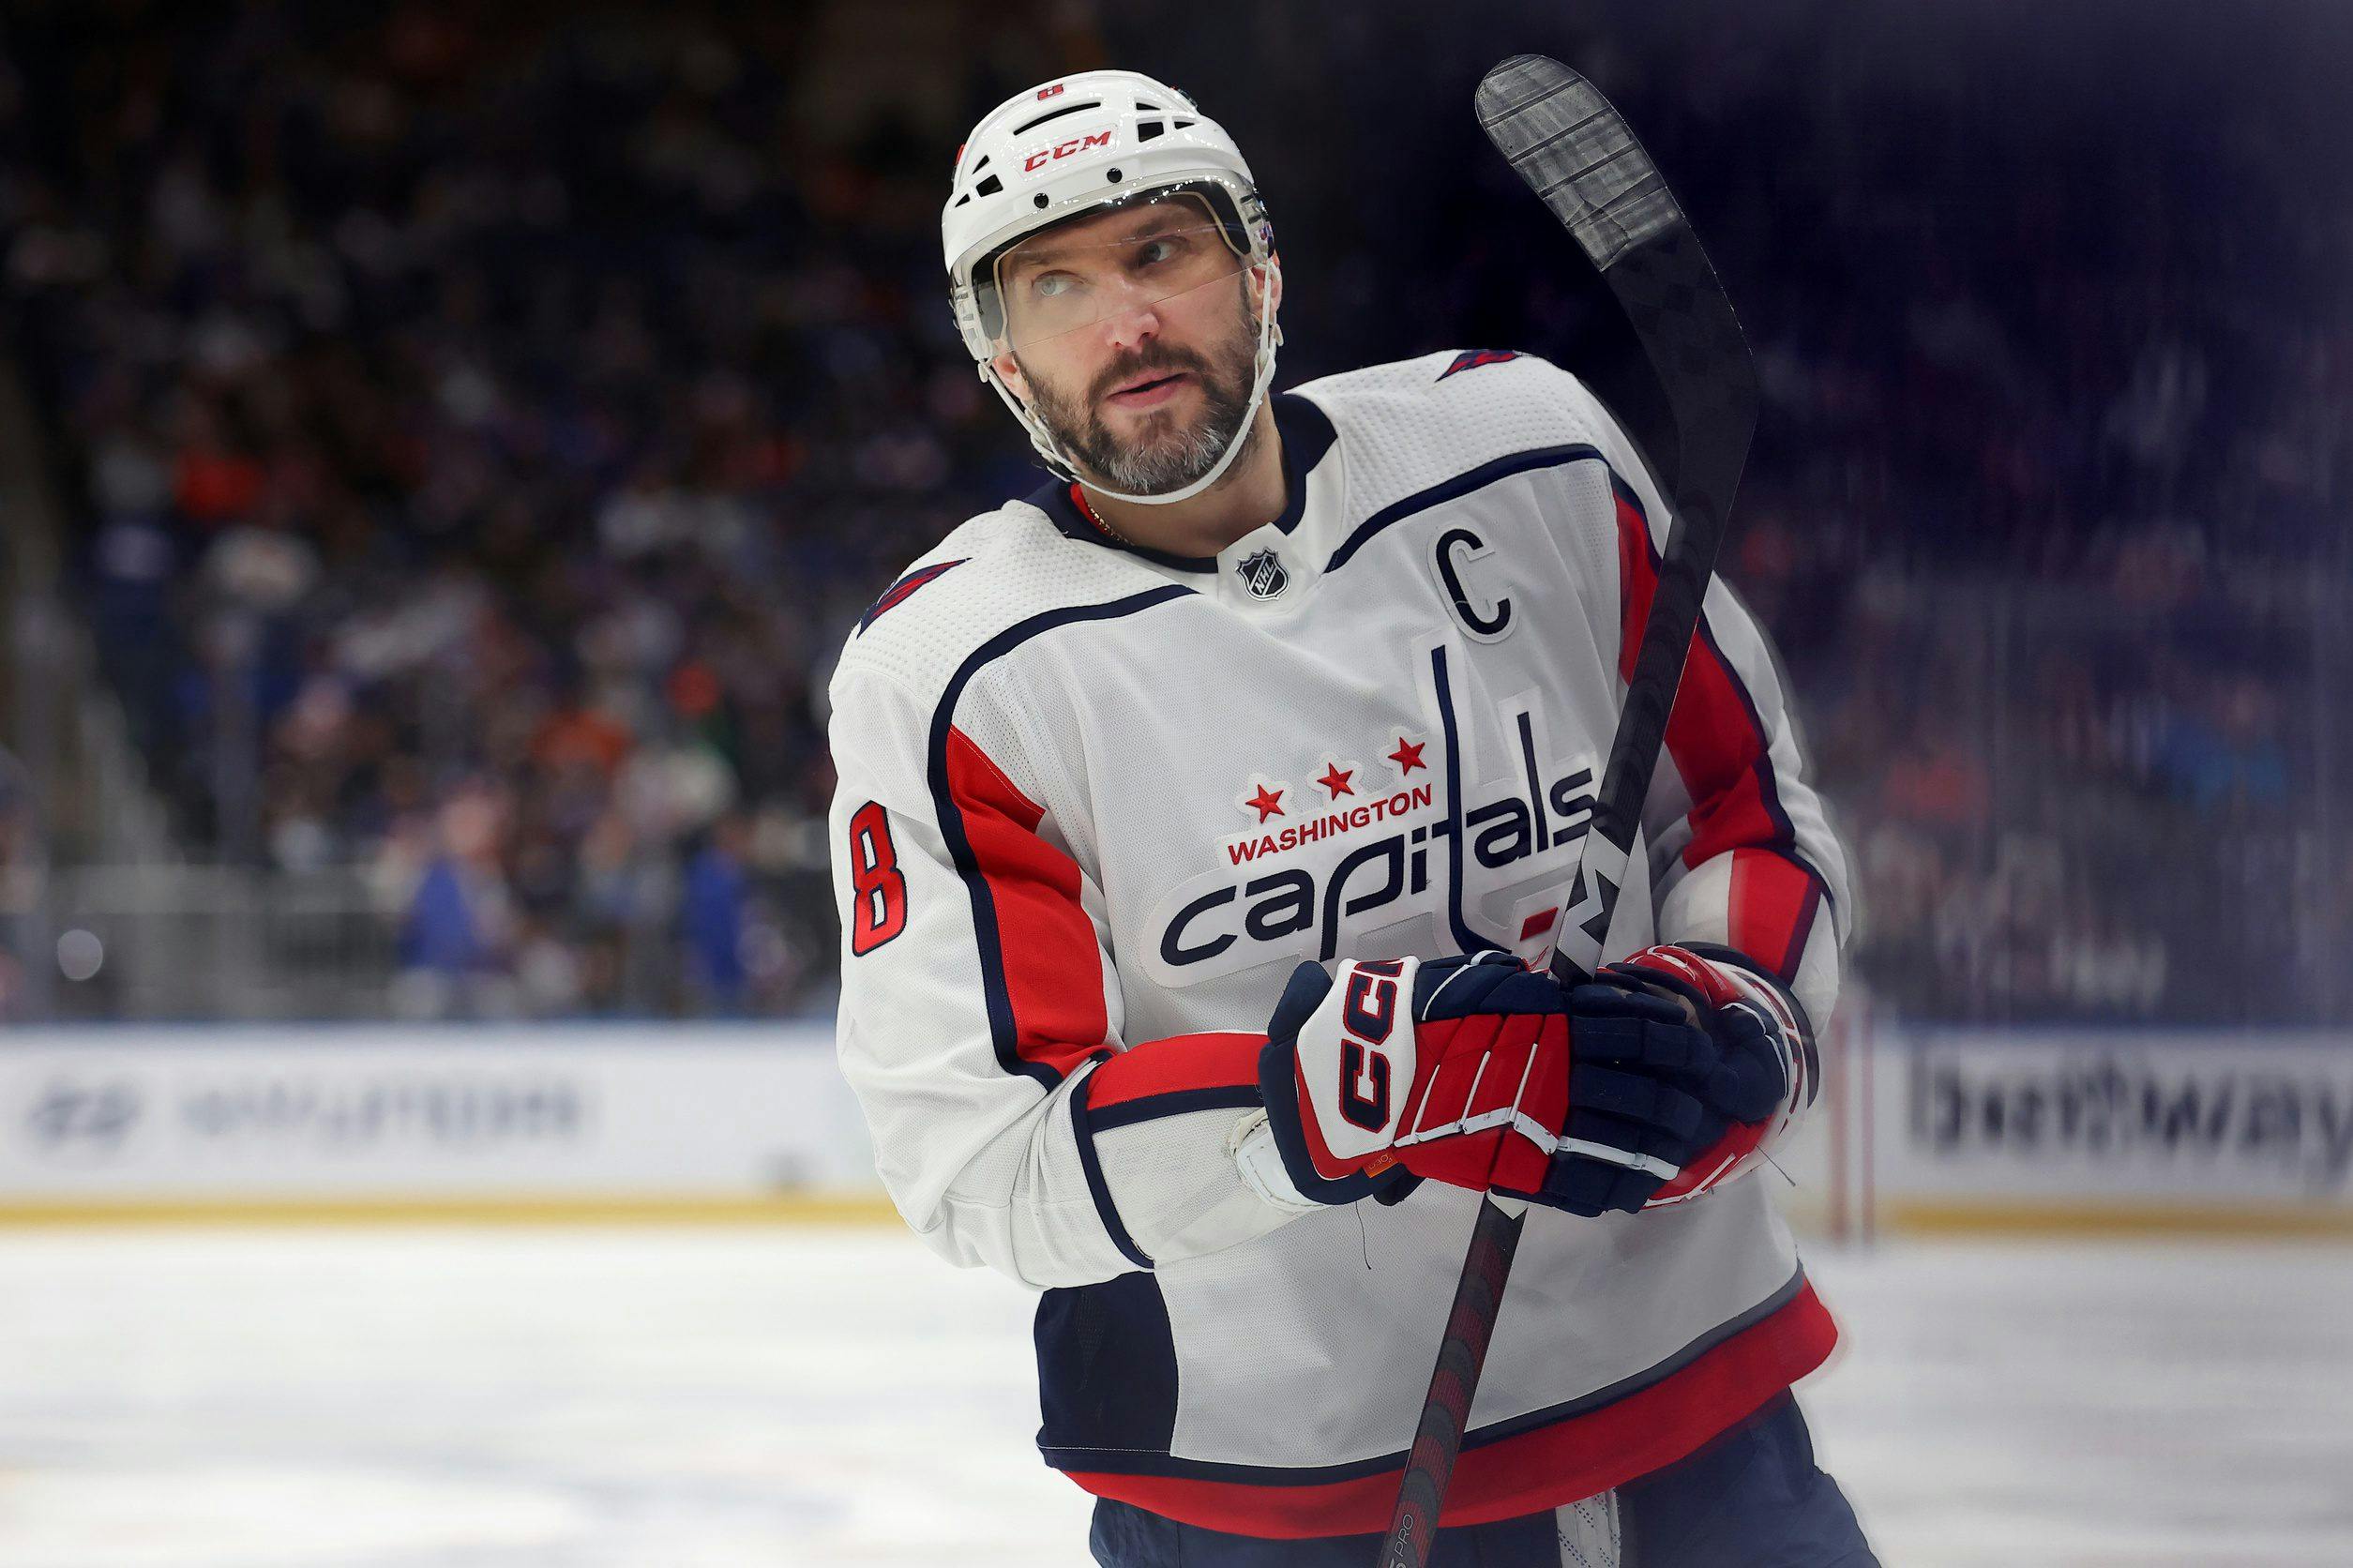 Alex Ovechkin to return Thursday for Washington Capitals after four-game absence